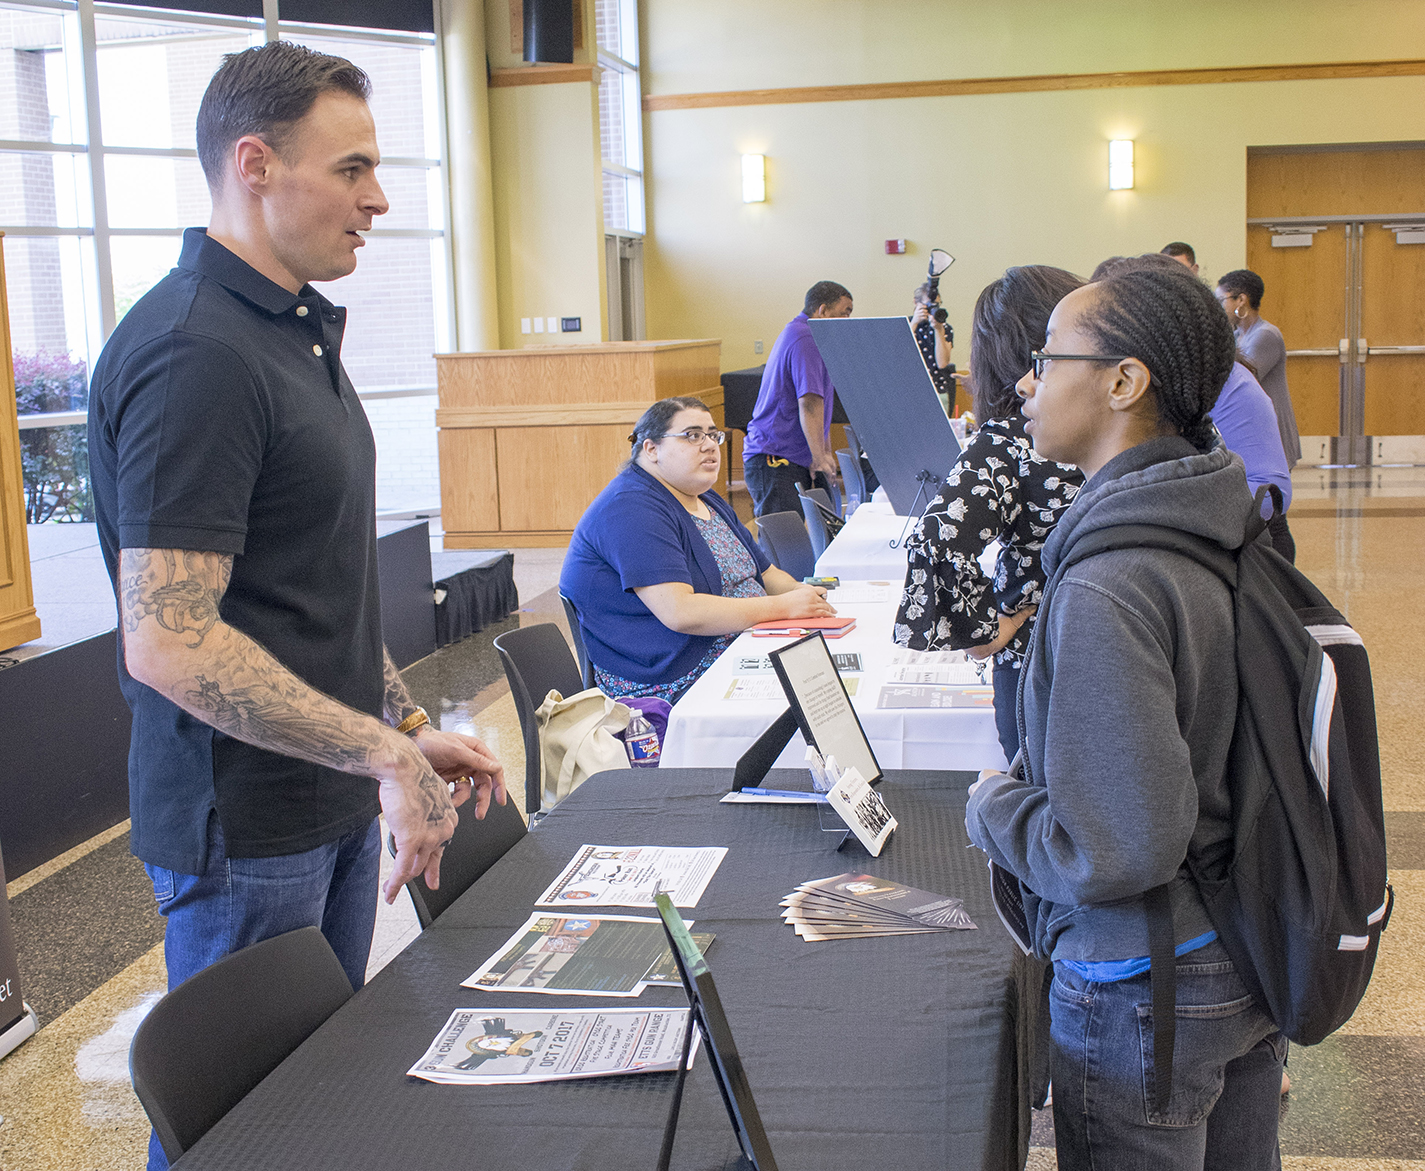 SE hosted a Veterans Resource Fair where community partners discussed programs for veterans who are enrolled at TCC. Rusty Carter talks with Cari Hammond about about Stay the Course, a program that offers counseling services to veterans and first responders.